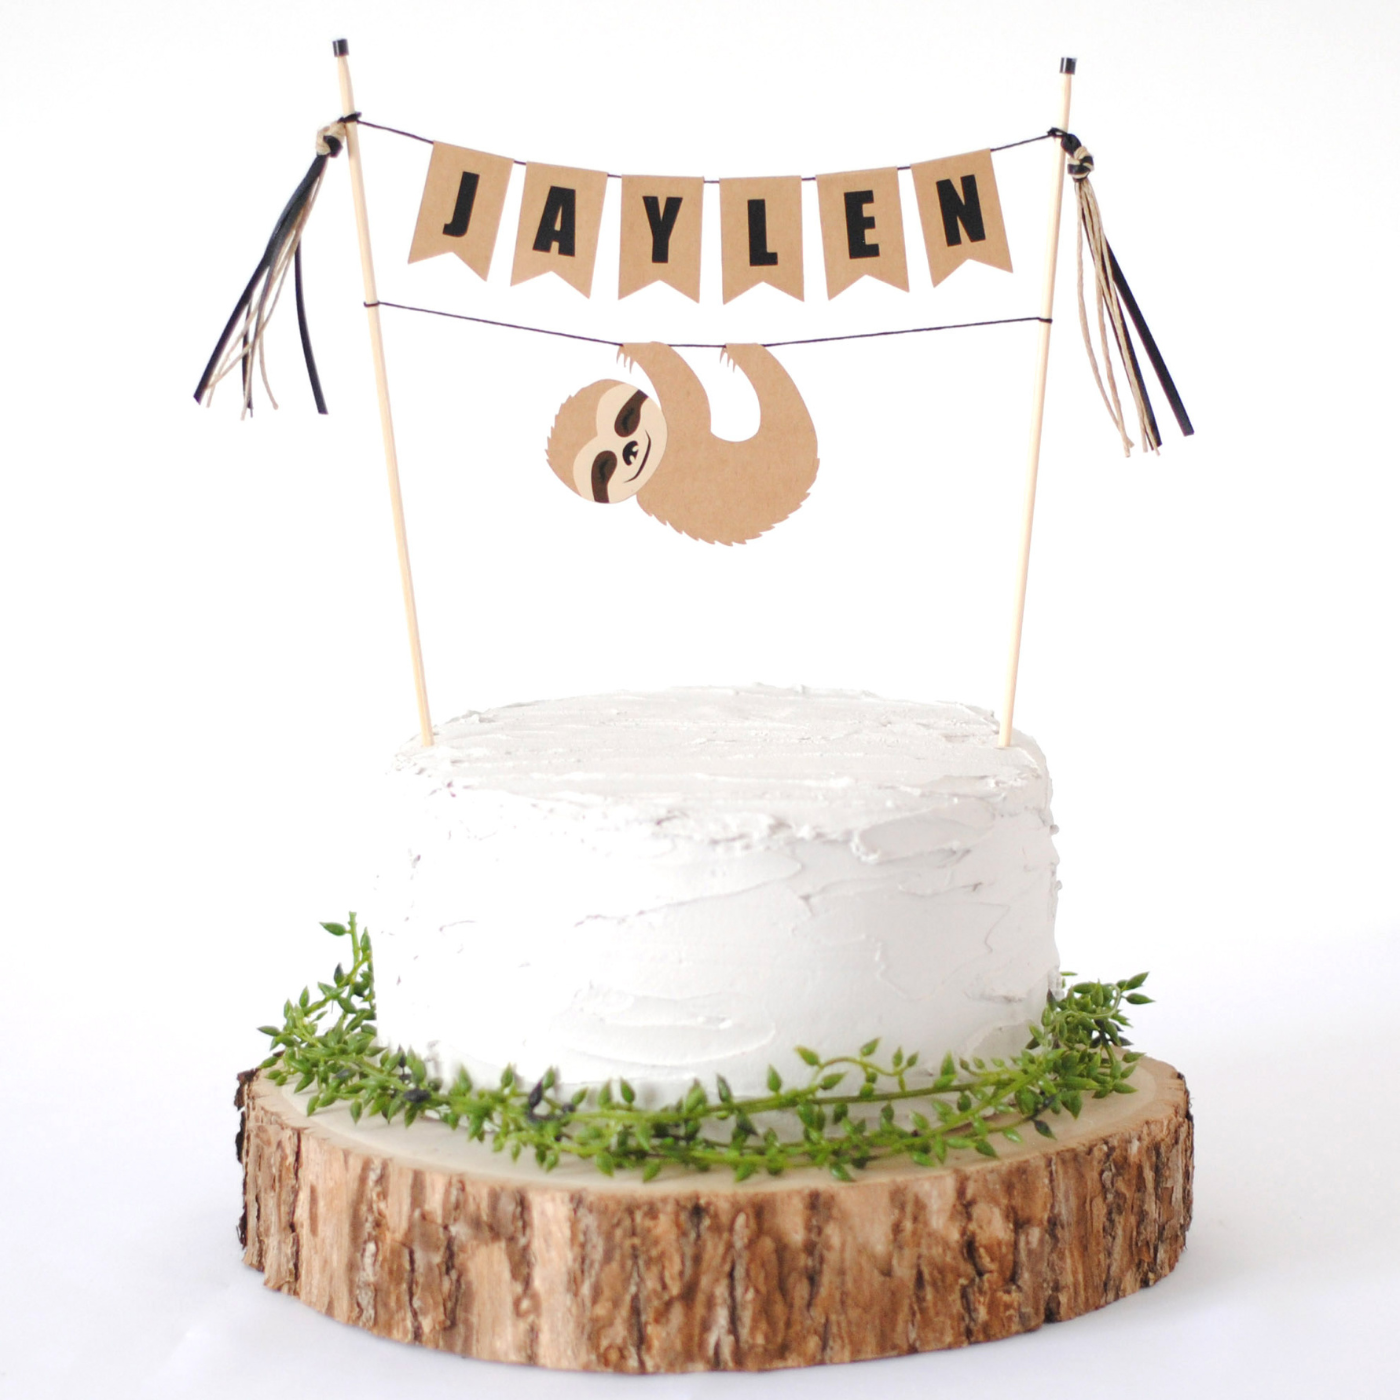 Sloth Birthday cake topper with personalized name banner | cake toppers by Avalon Sunshine